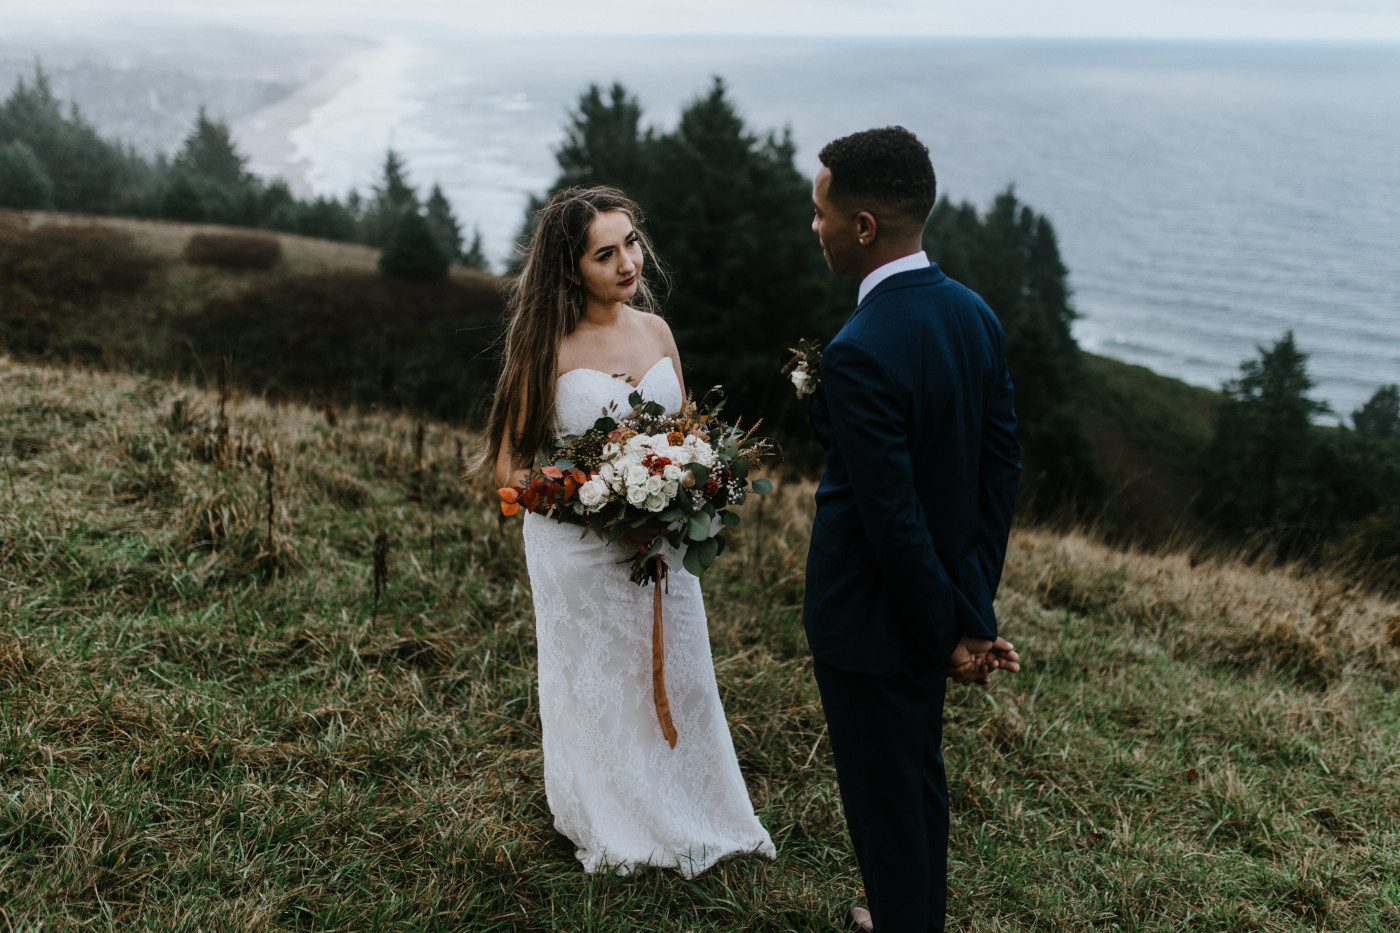 Ariana and Deandre during their elopement with a view of the Oregon coast in the background. Elopement photography at Mount Hood by Sienna Plus Josh.